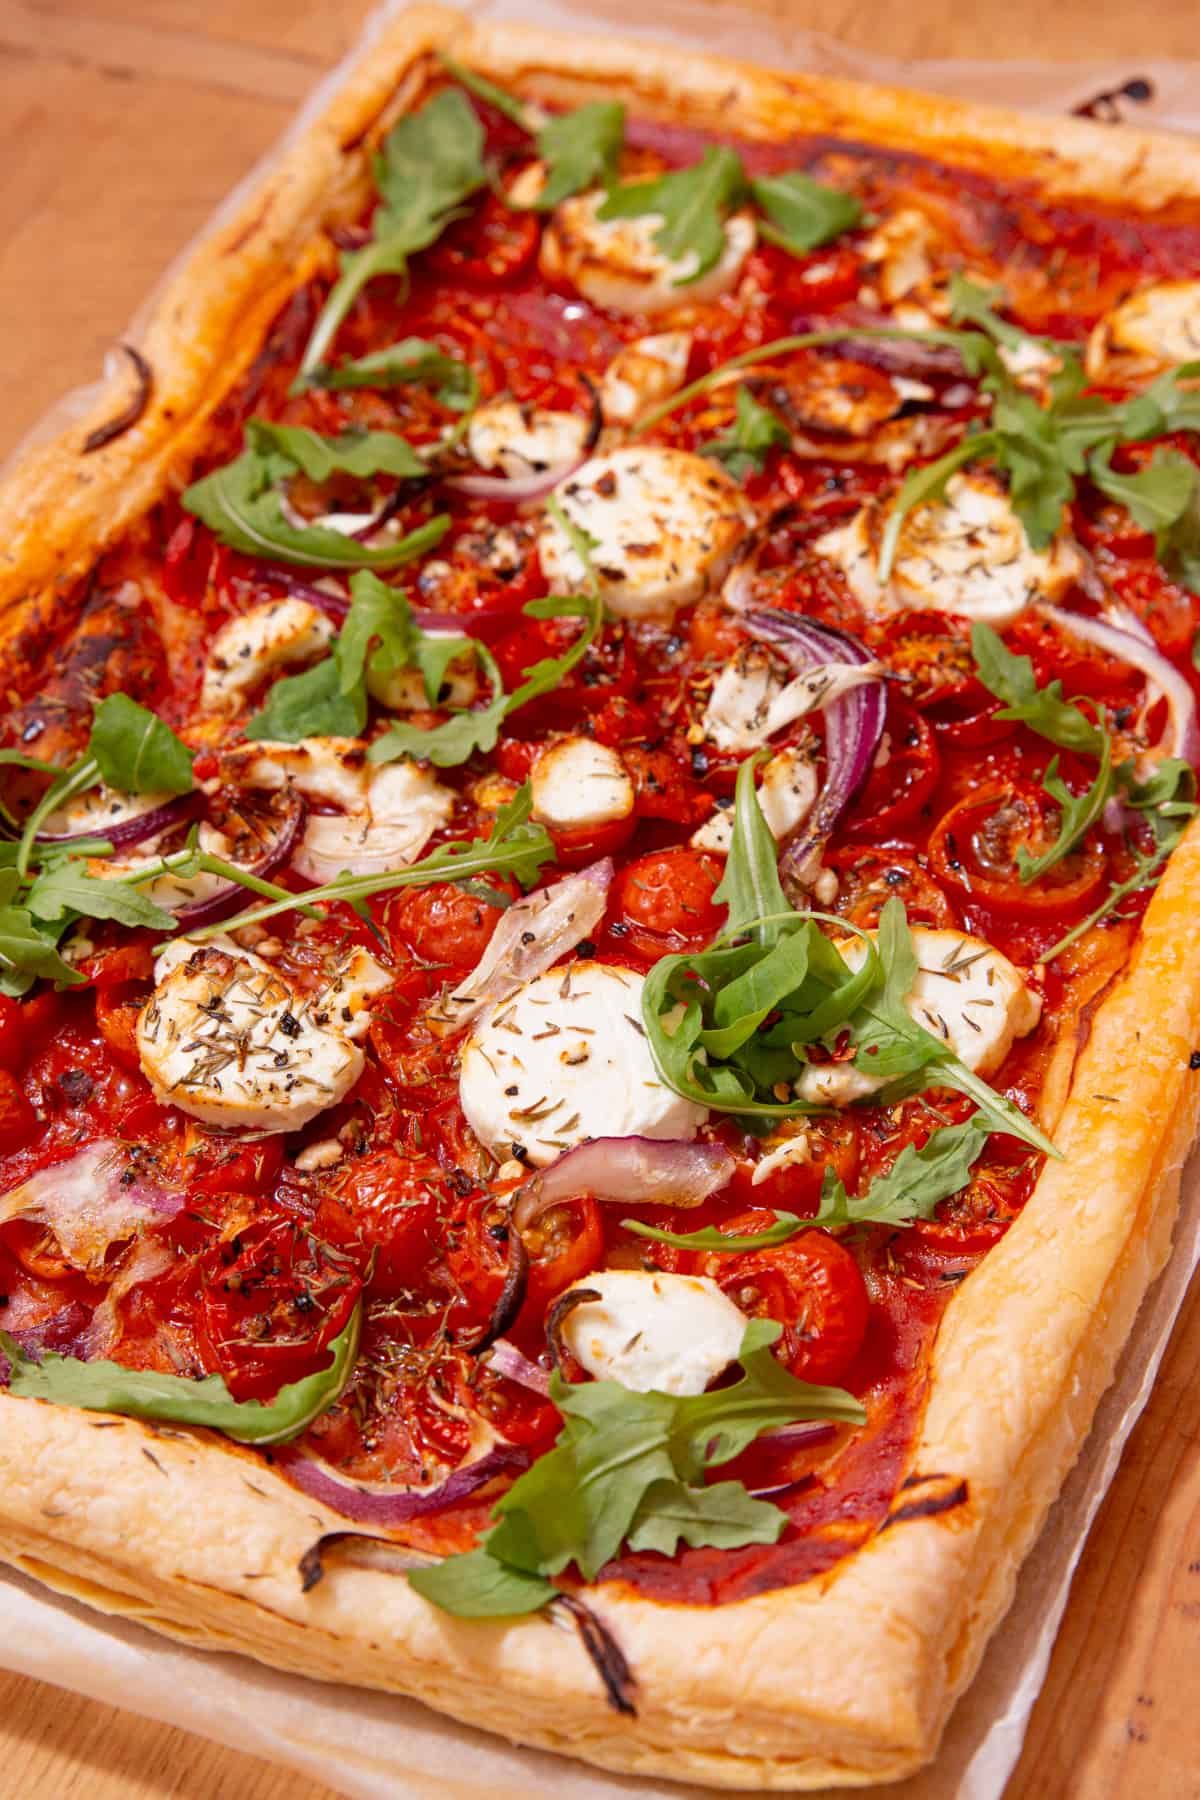 Large,rectangular pastry topped with goat's cheese  with tomatoes and topped with rocket and red onion slices laid out on parchment paper on a wooden board.